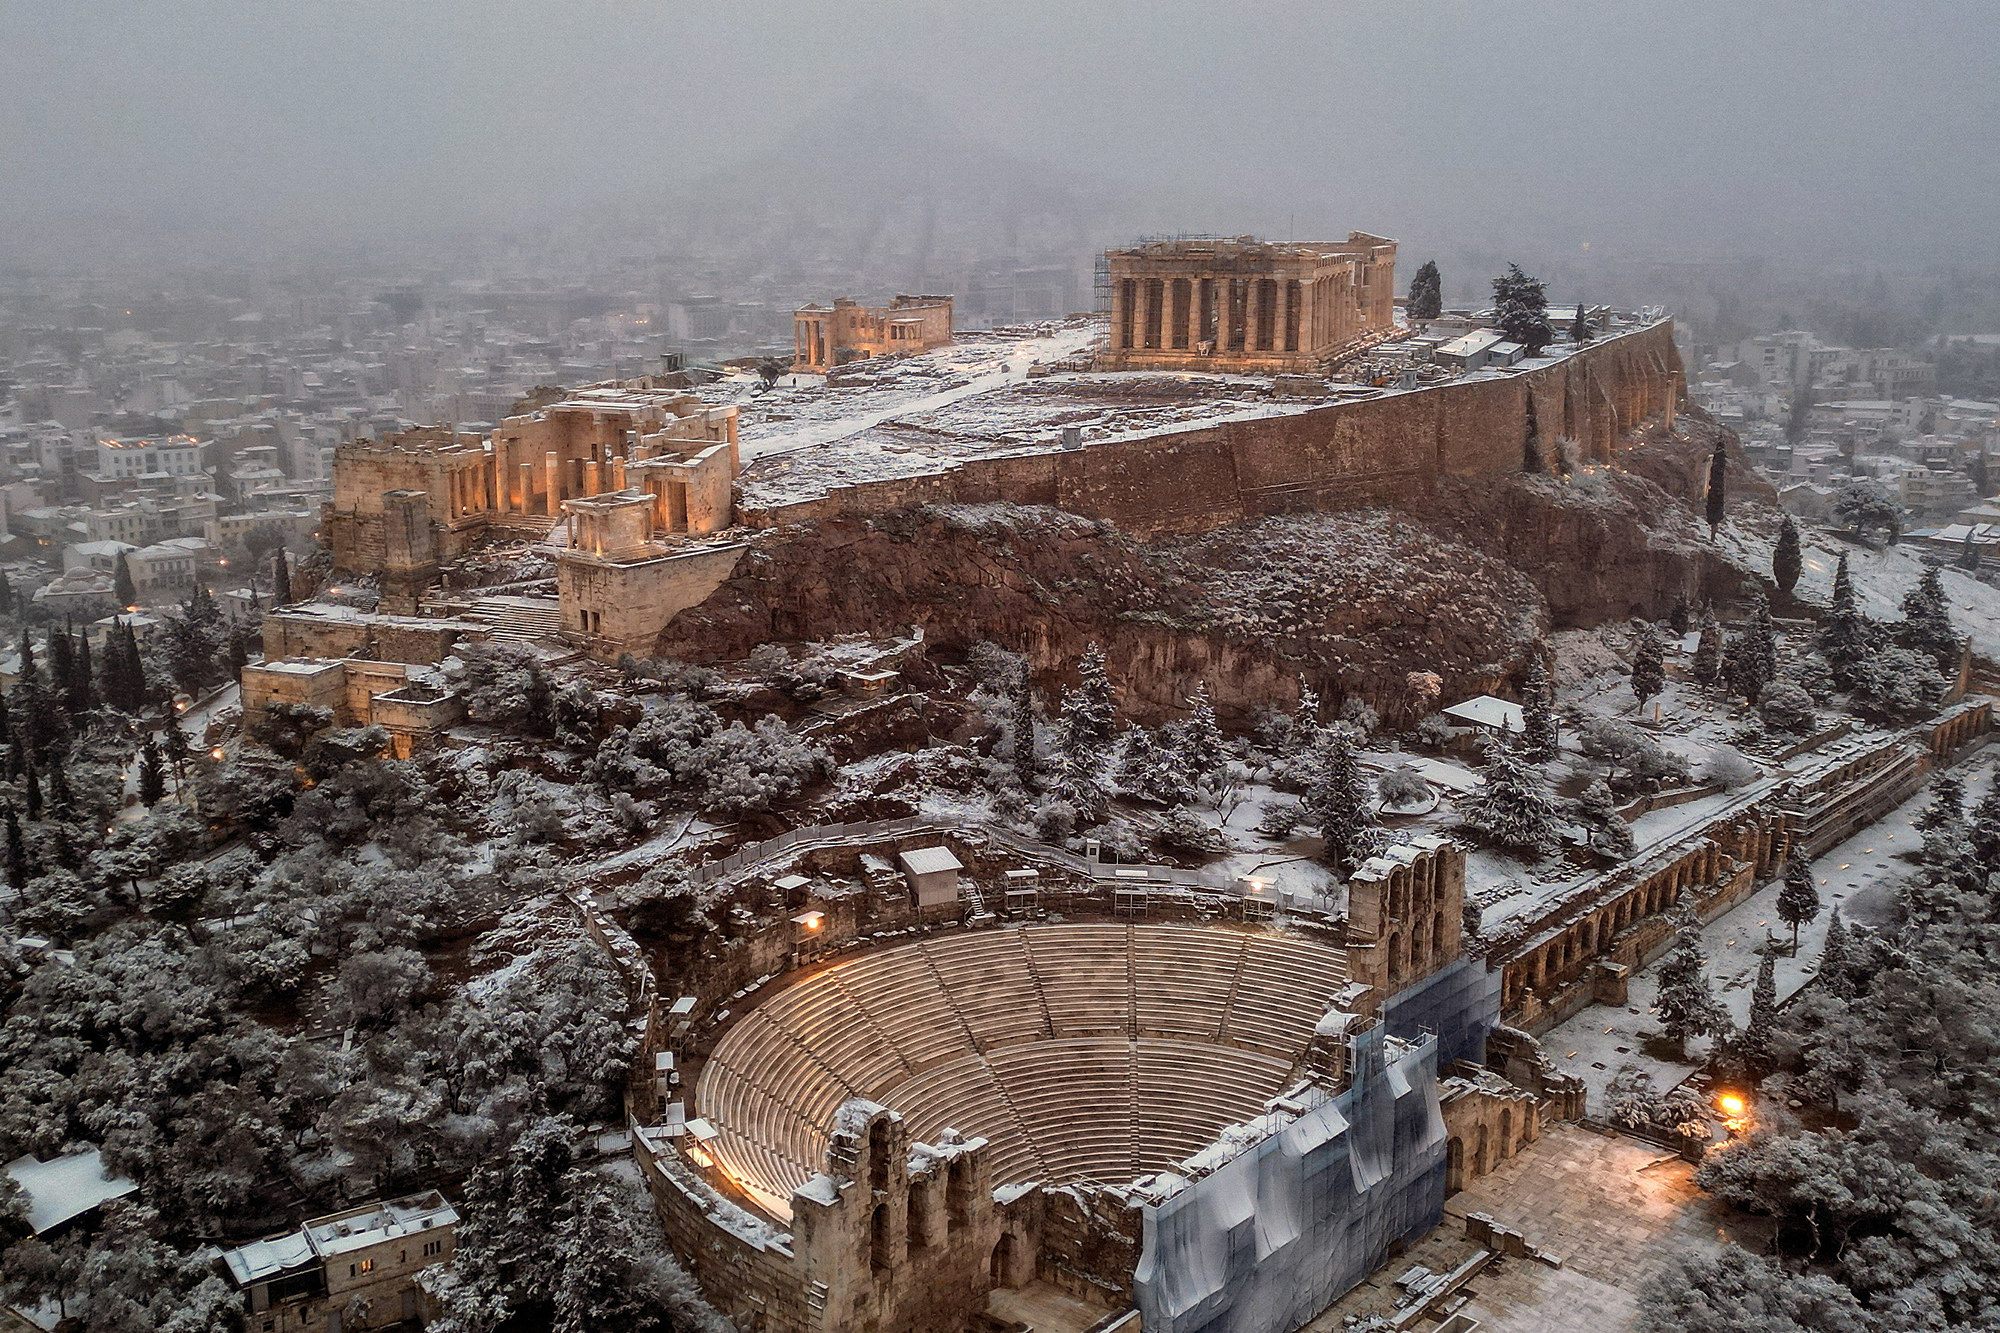 the parthenon temple shot from overhead on a snowy overcast day